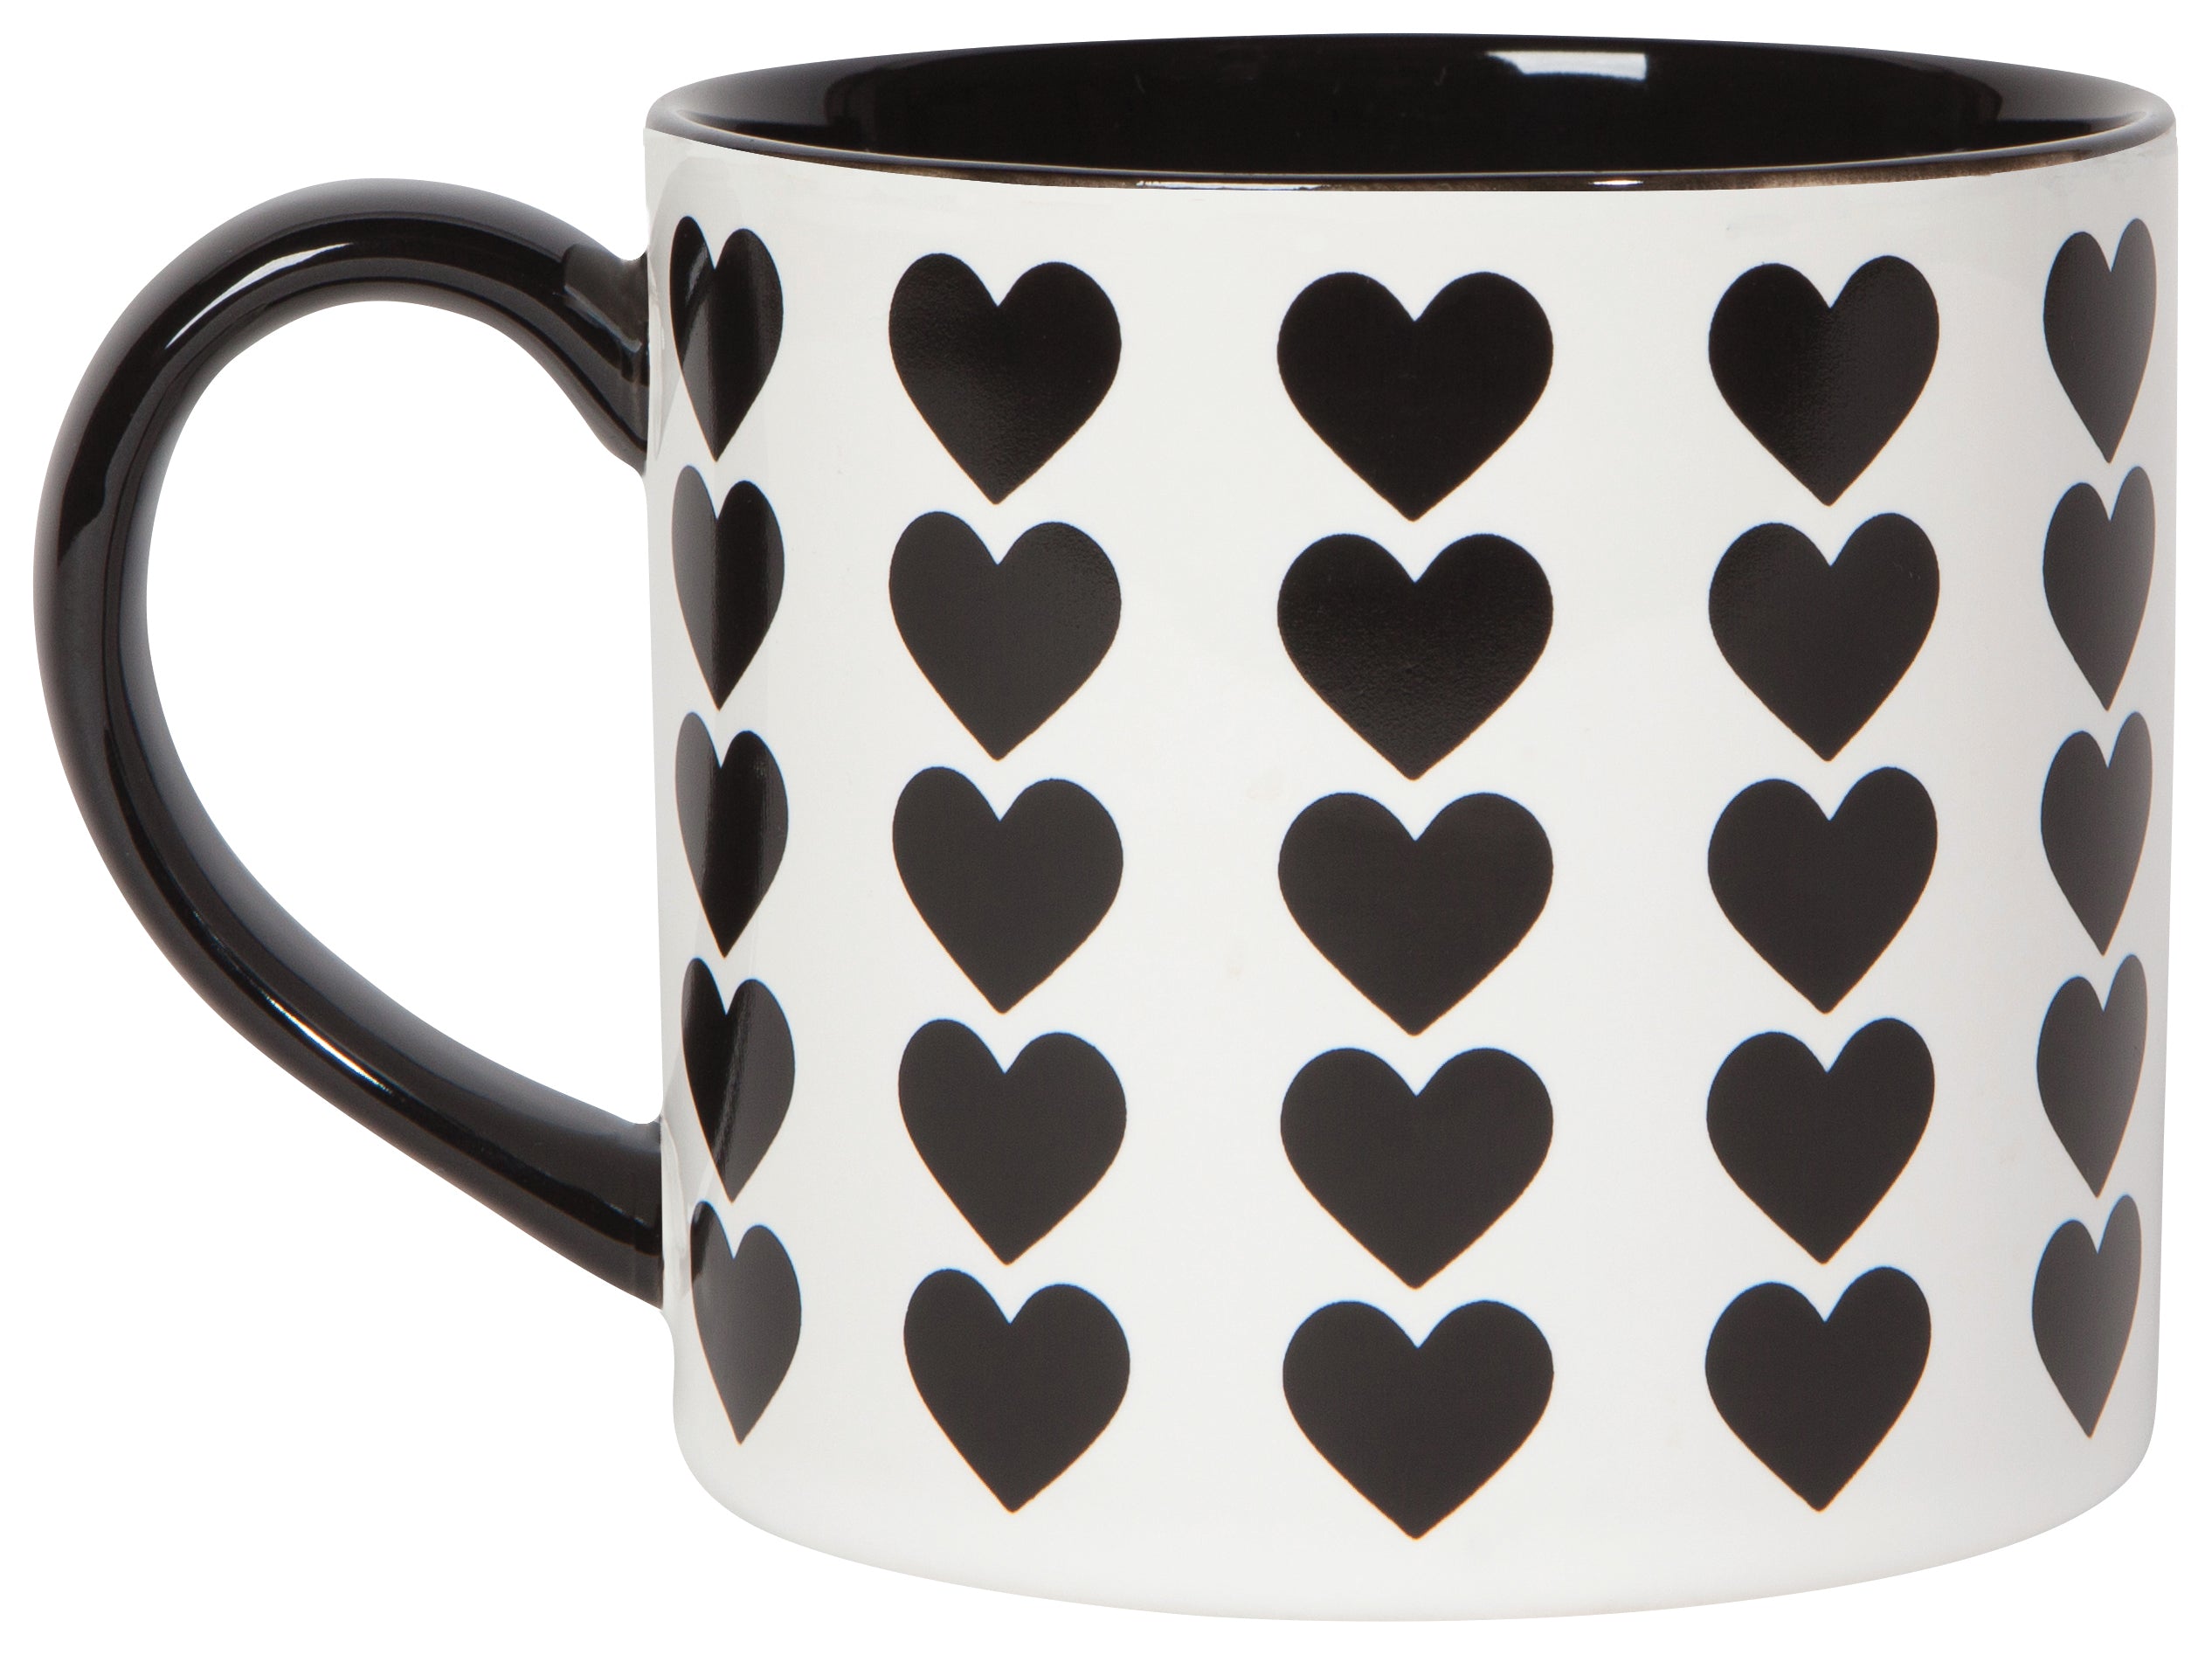 white mug with black interior and handle, with black hearts in a pattern printed on the exterior